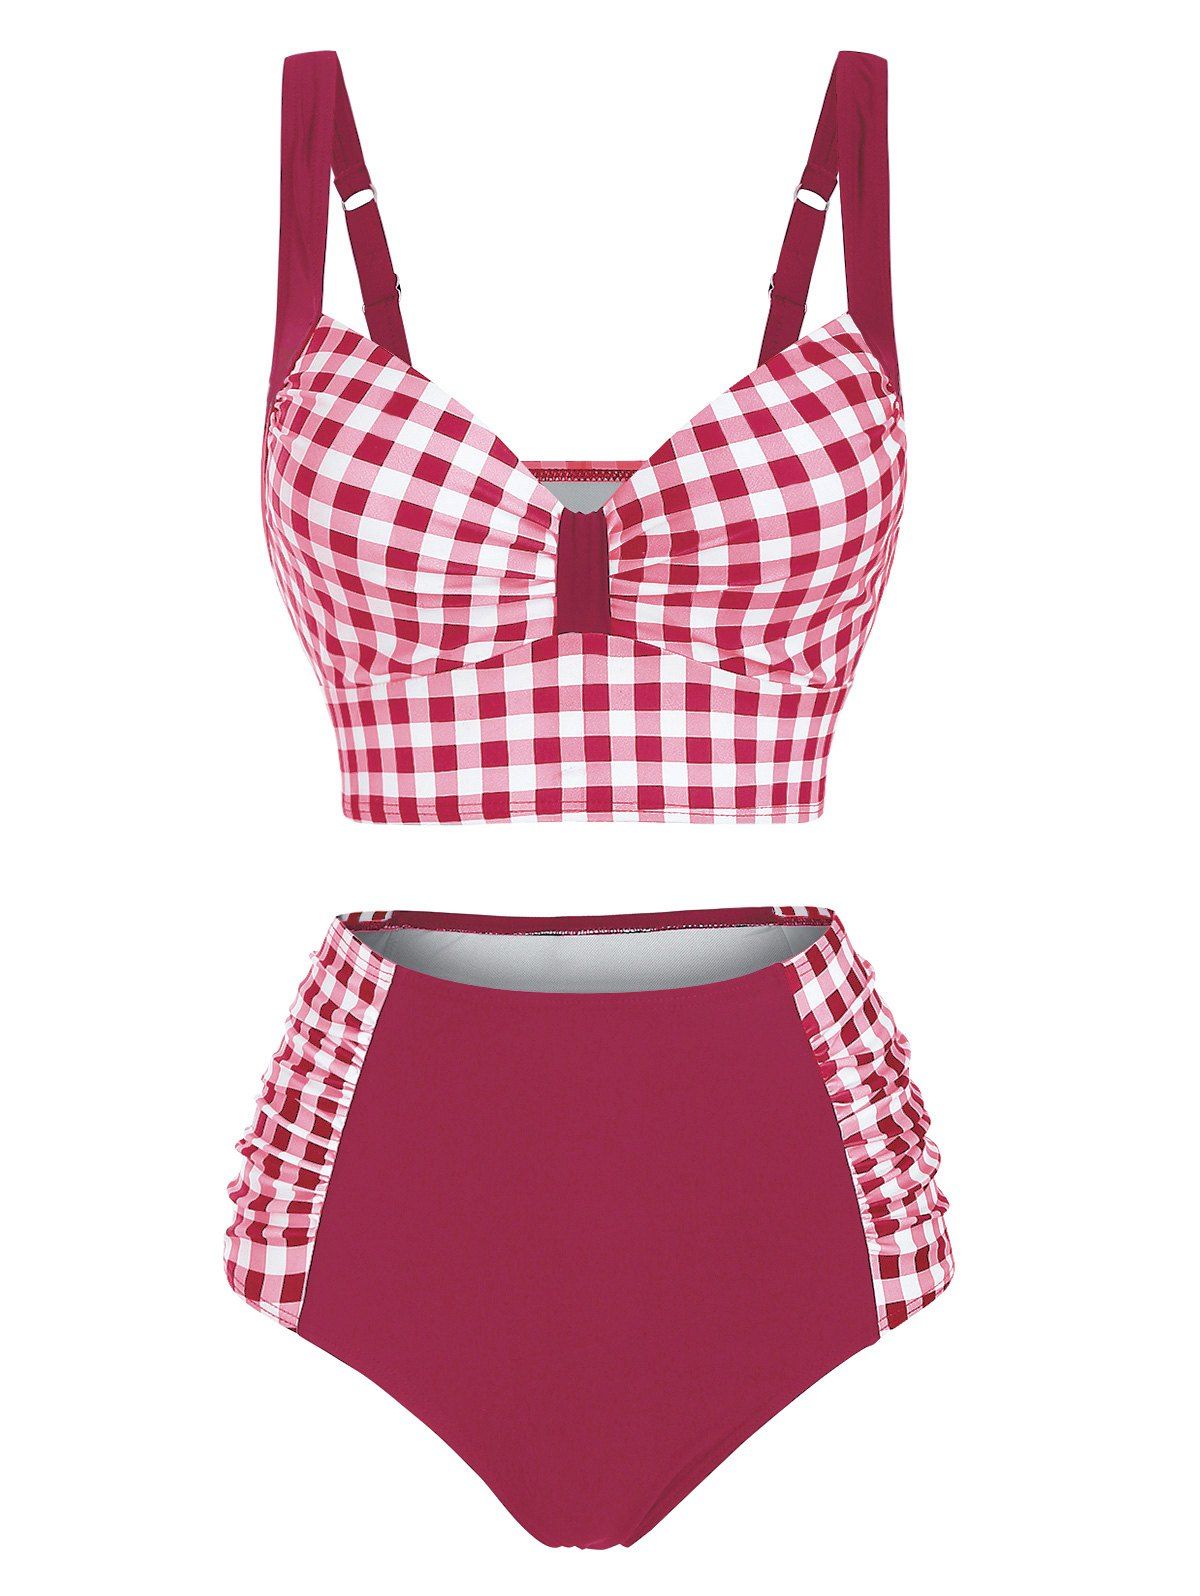 Summer Beach Tankini Swimwear Gingham Plaid Print Push Up Swimsuit Ruched High Rise Tummy Control Bathing Suit - RED L